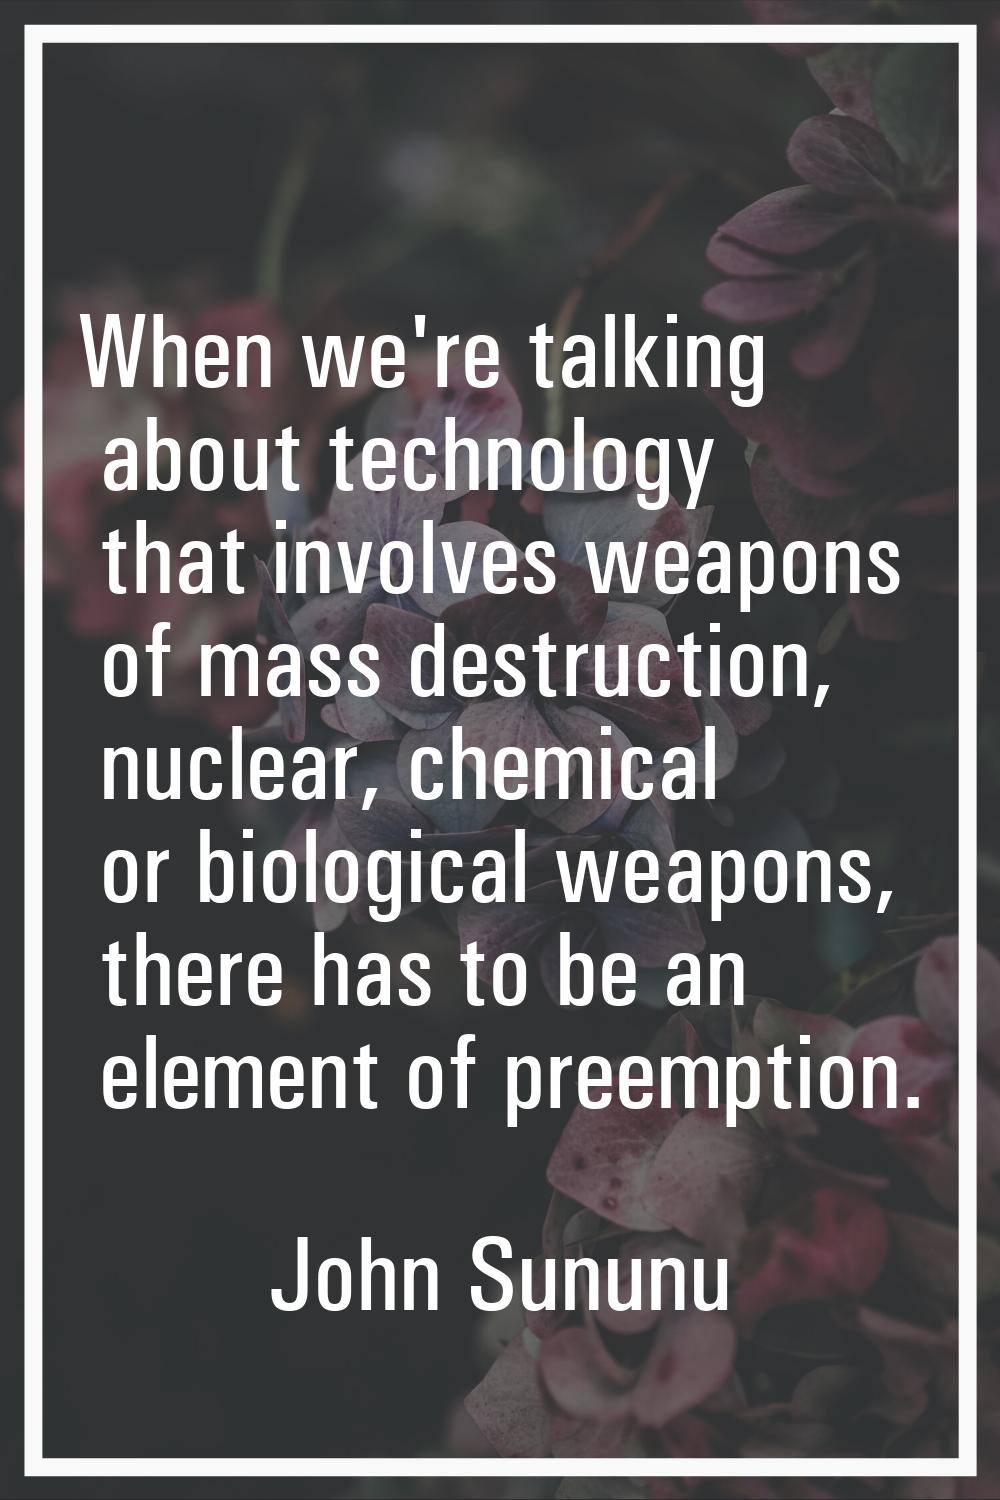 When we're talking about technology that involves weapons of mass destruction, nuclear, chemical or